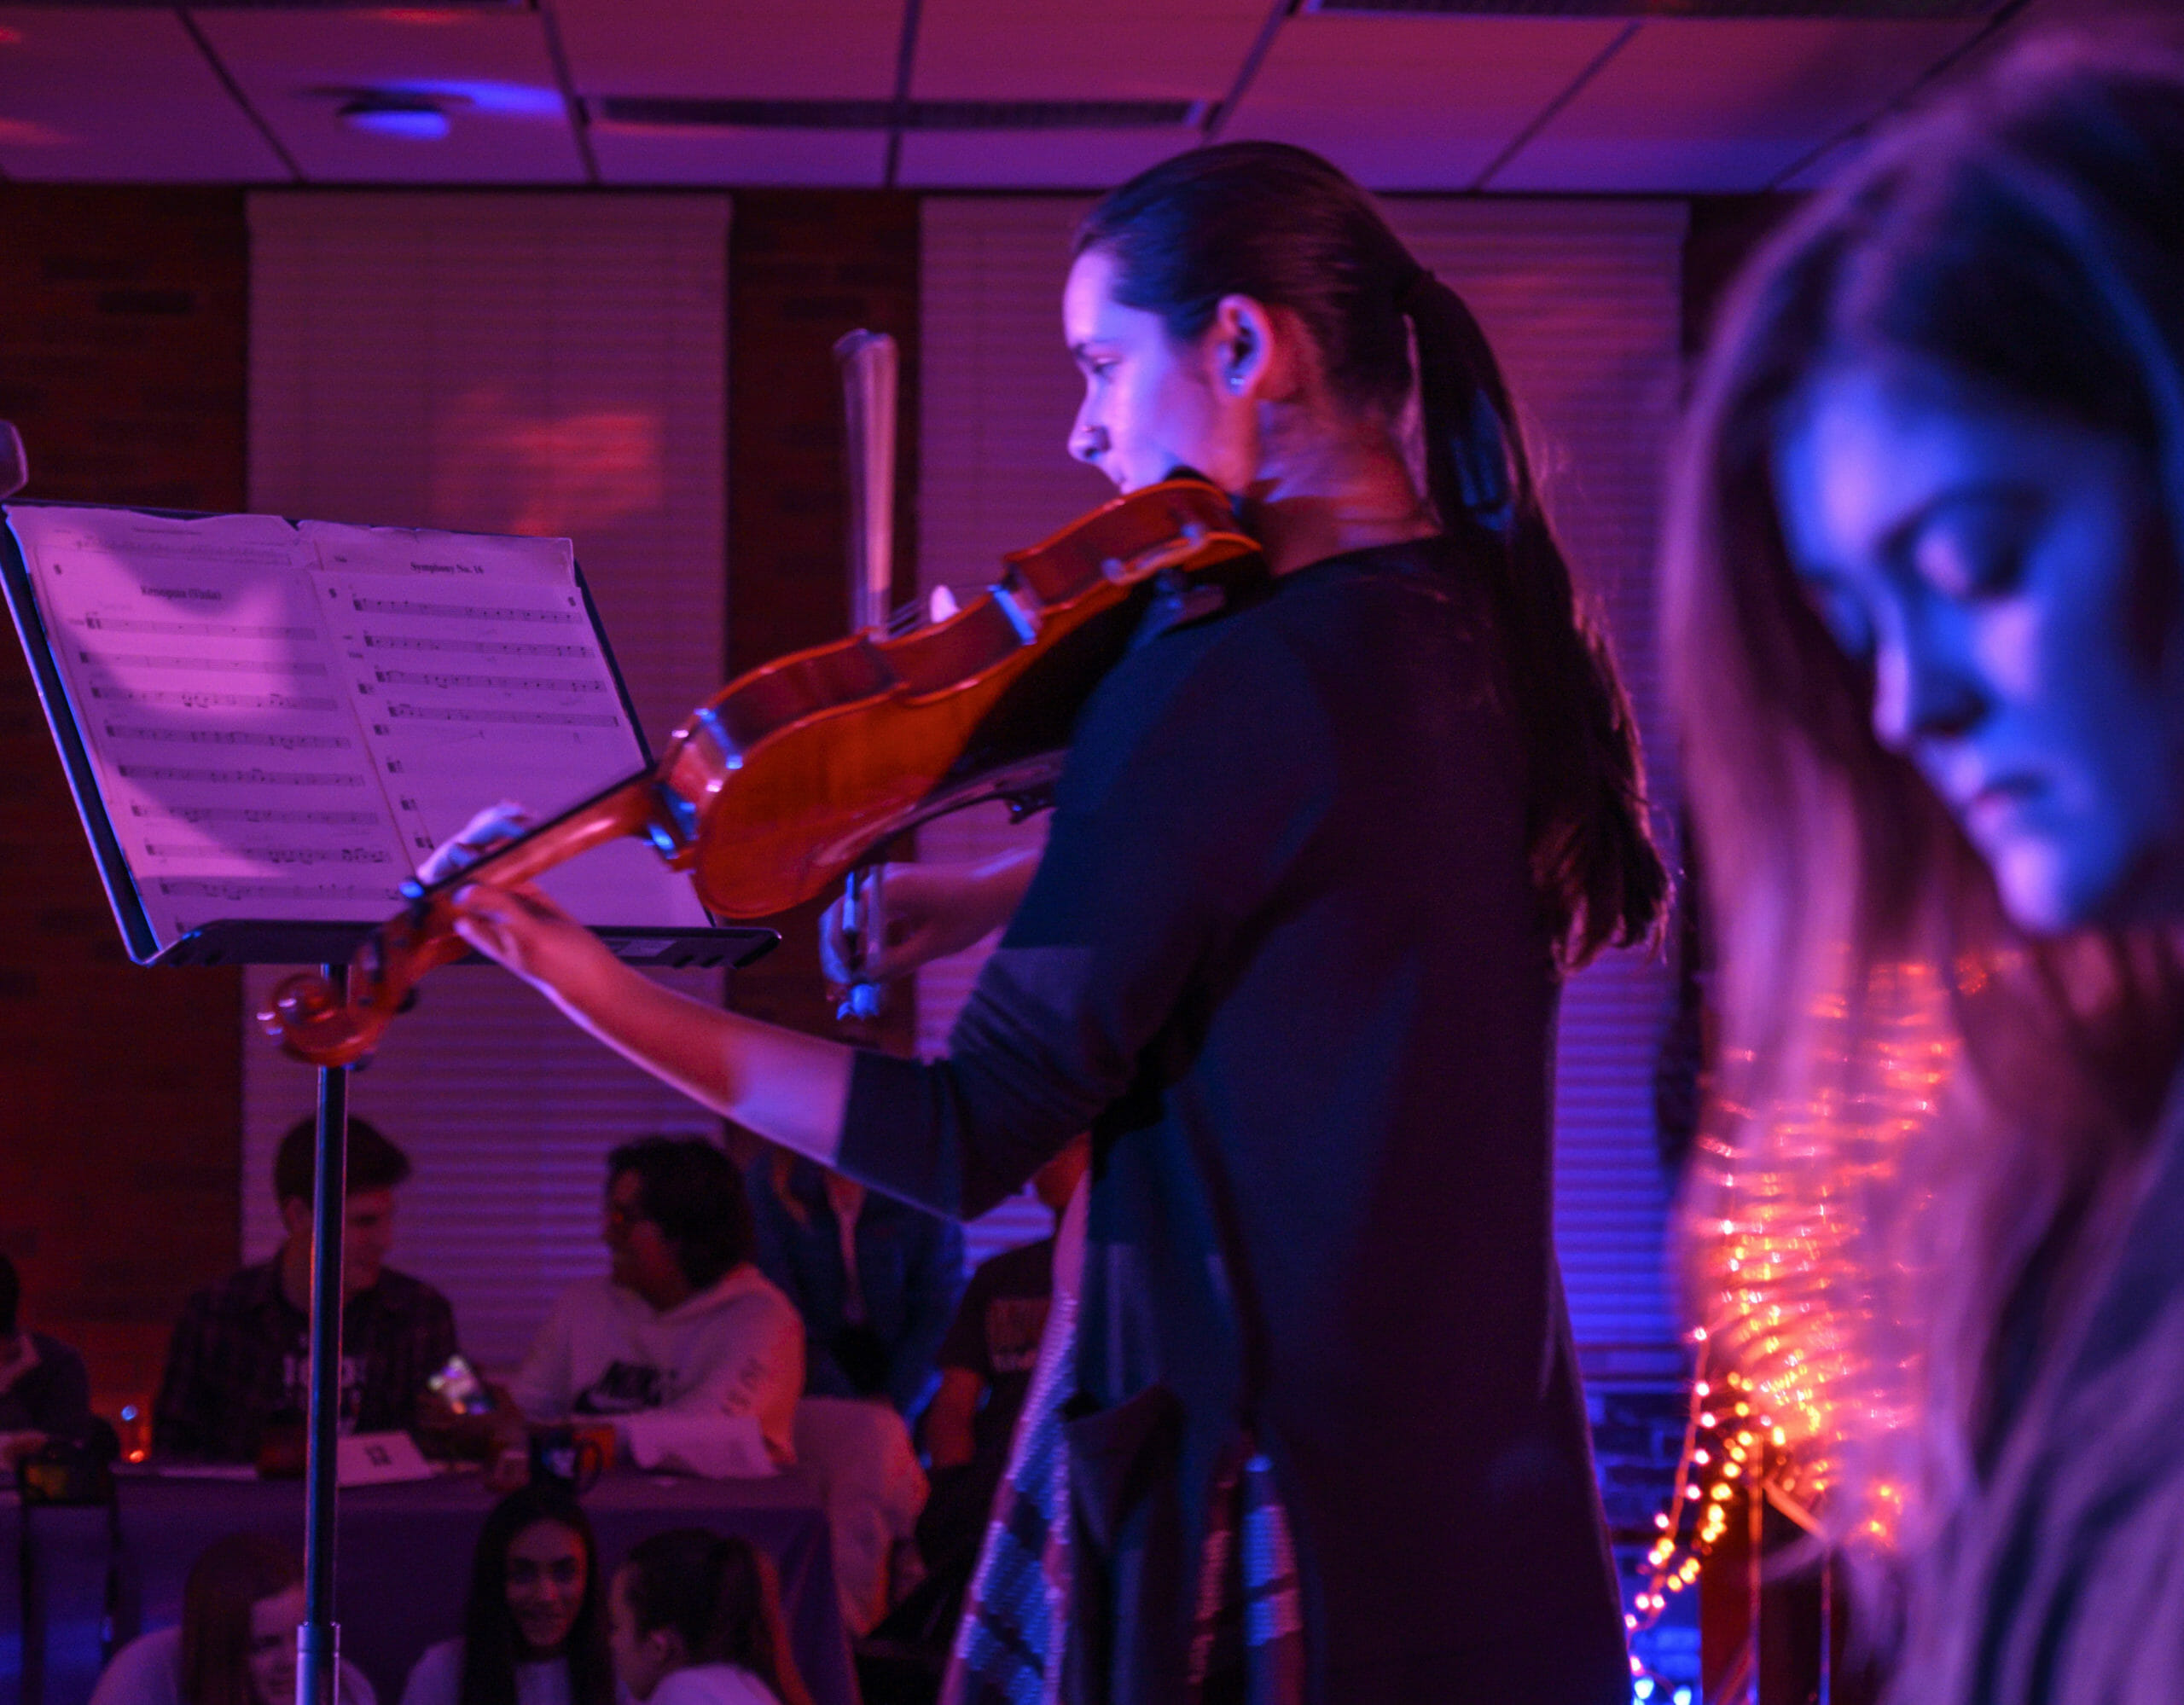 Violin performance at Blue Whale Cafe